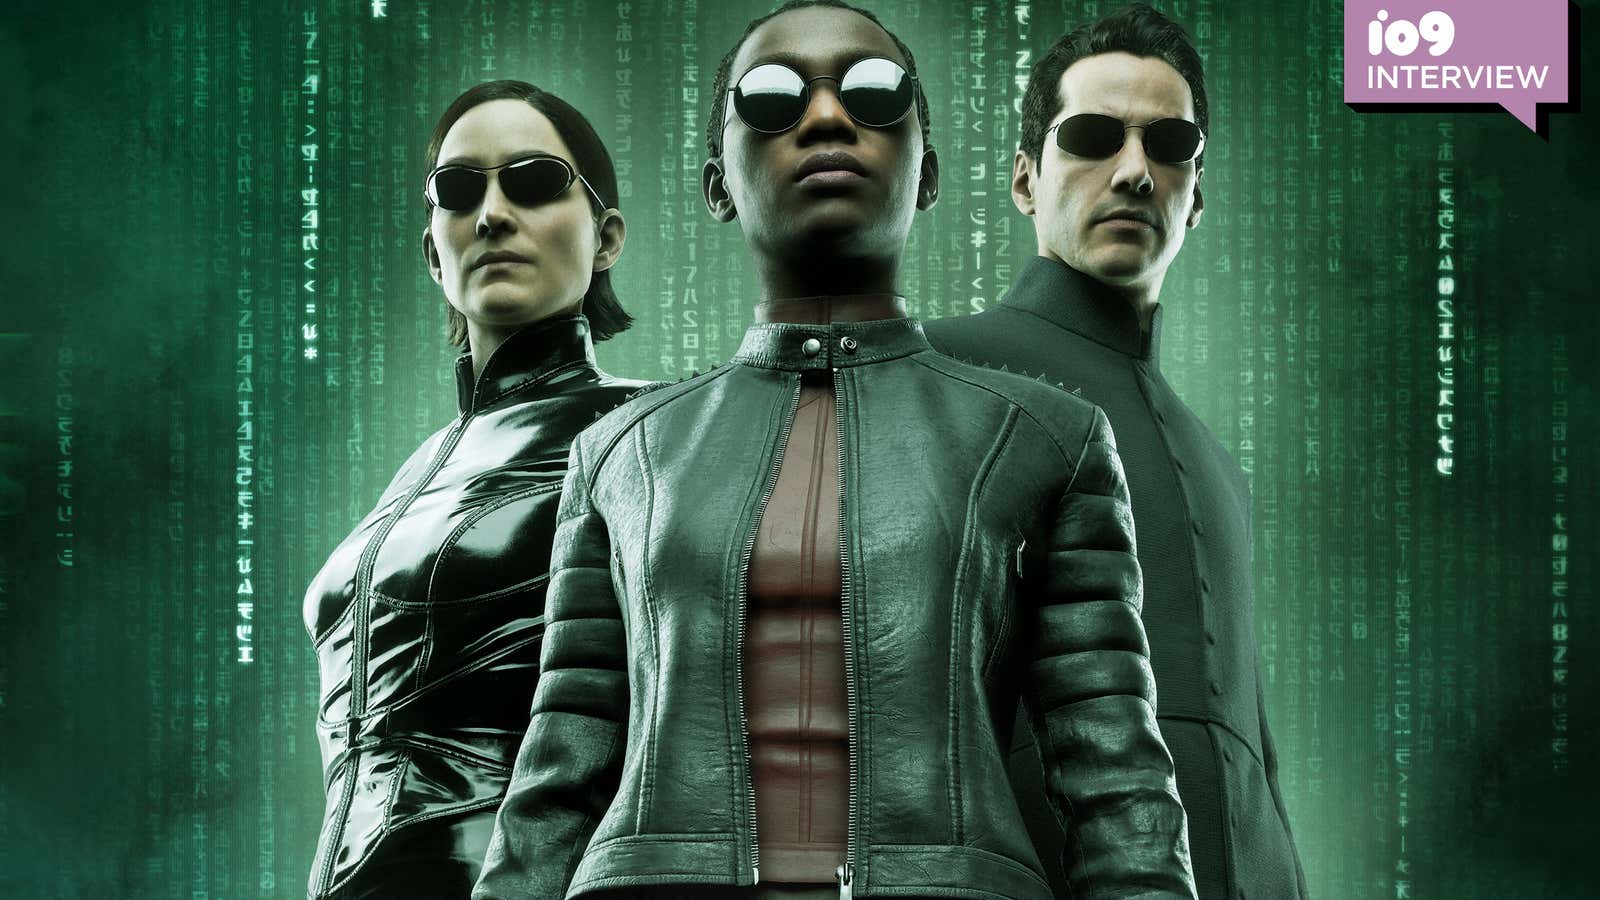 The Matrix Awakens uses the power of the franchise to show the next evolution in gaming.